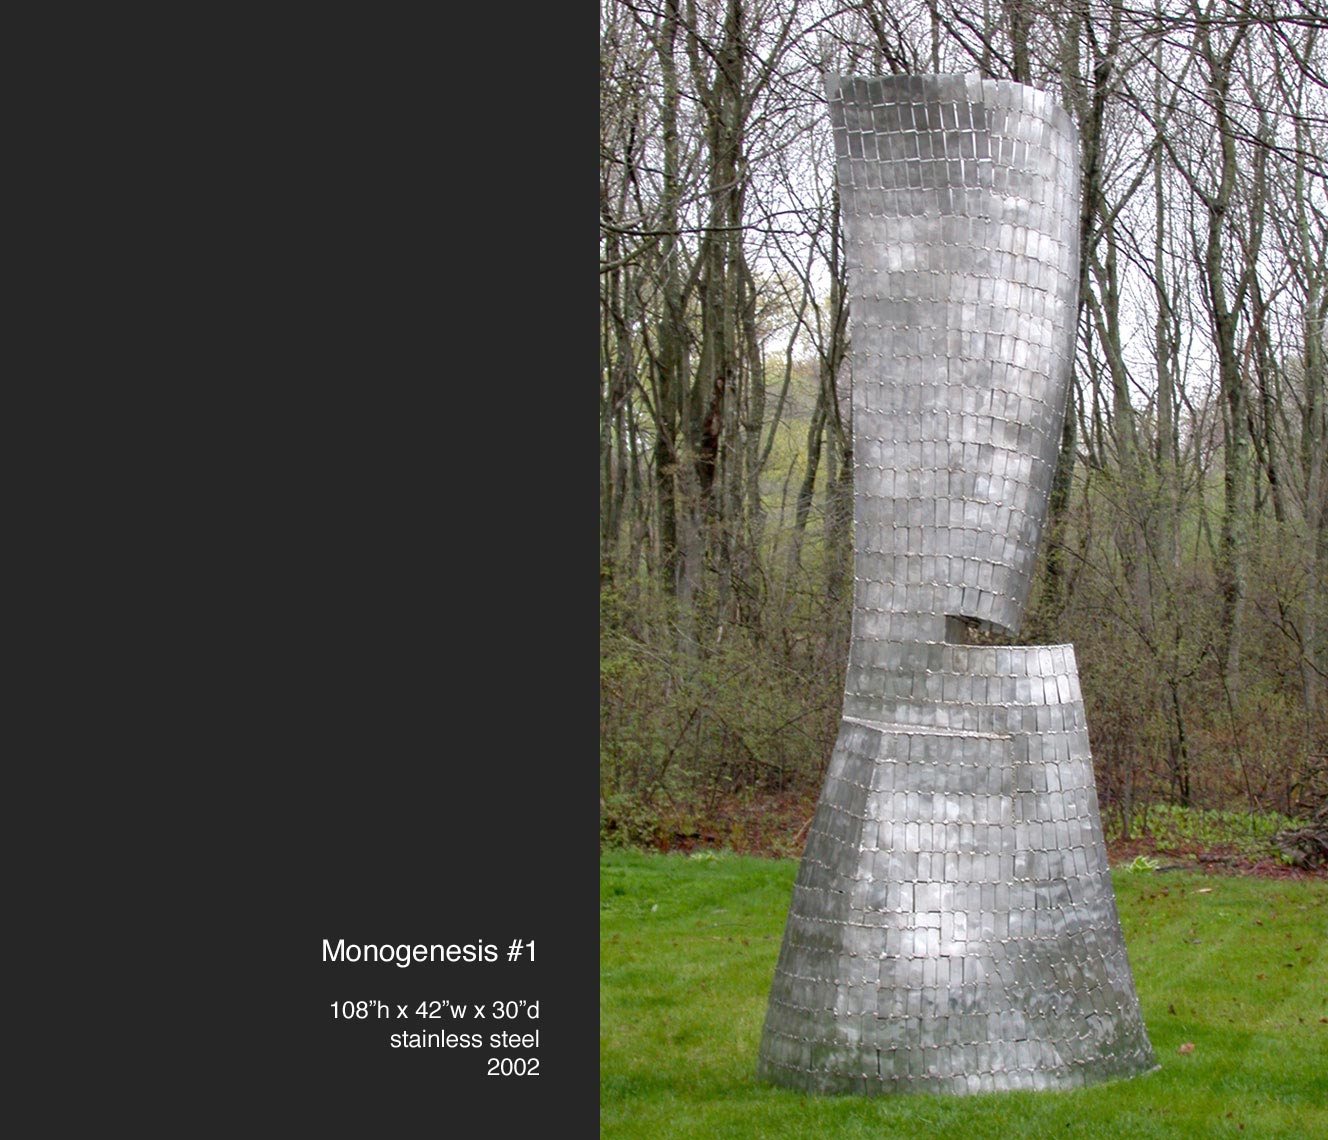 Monogenesis I: An Iconic Residential Installation by Peter Diepenbrock